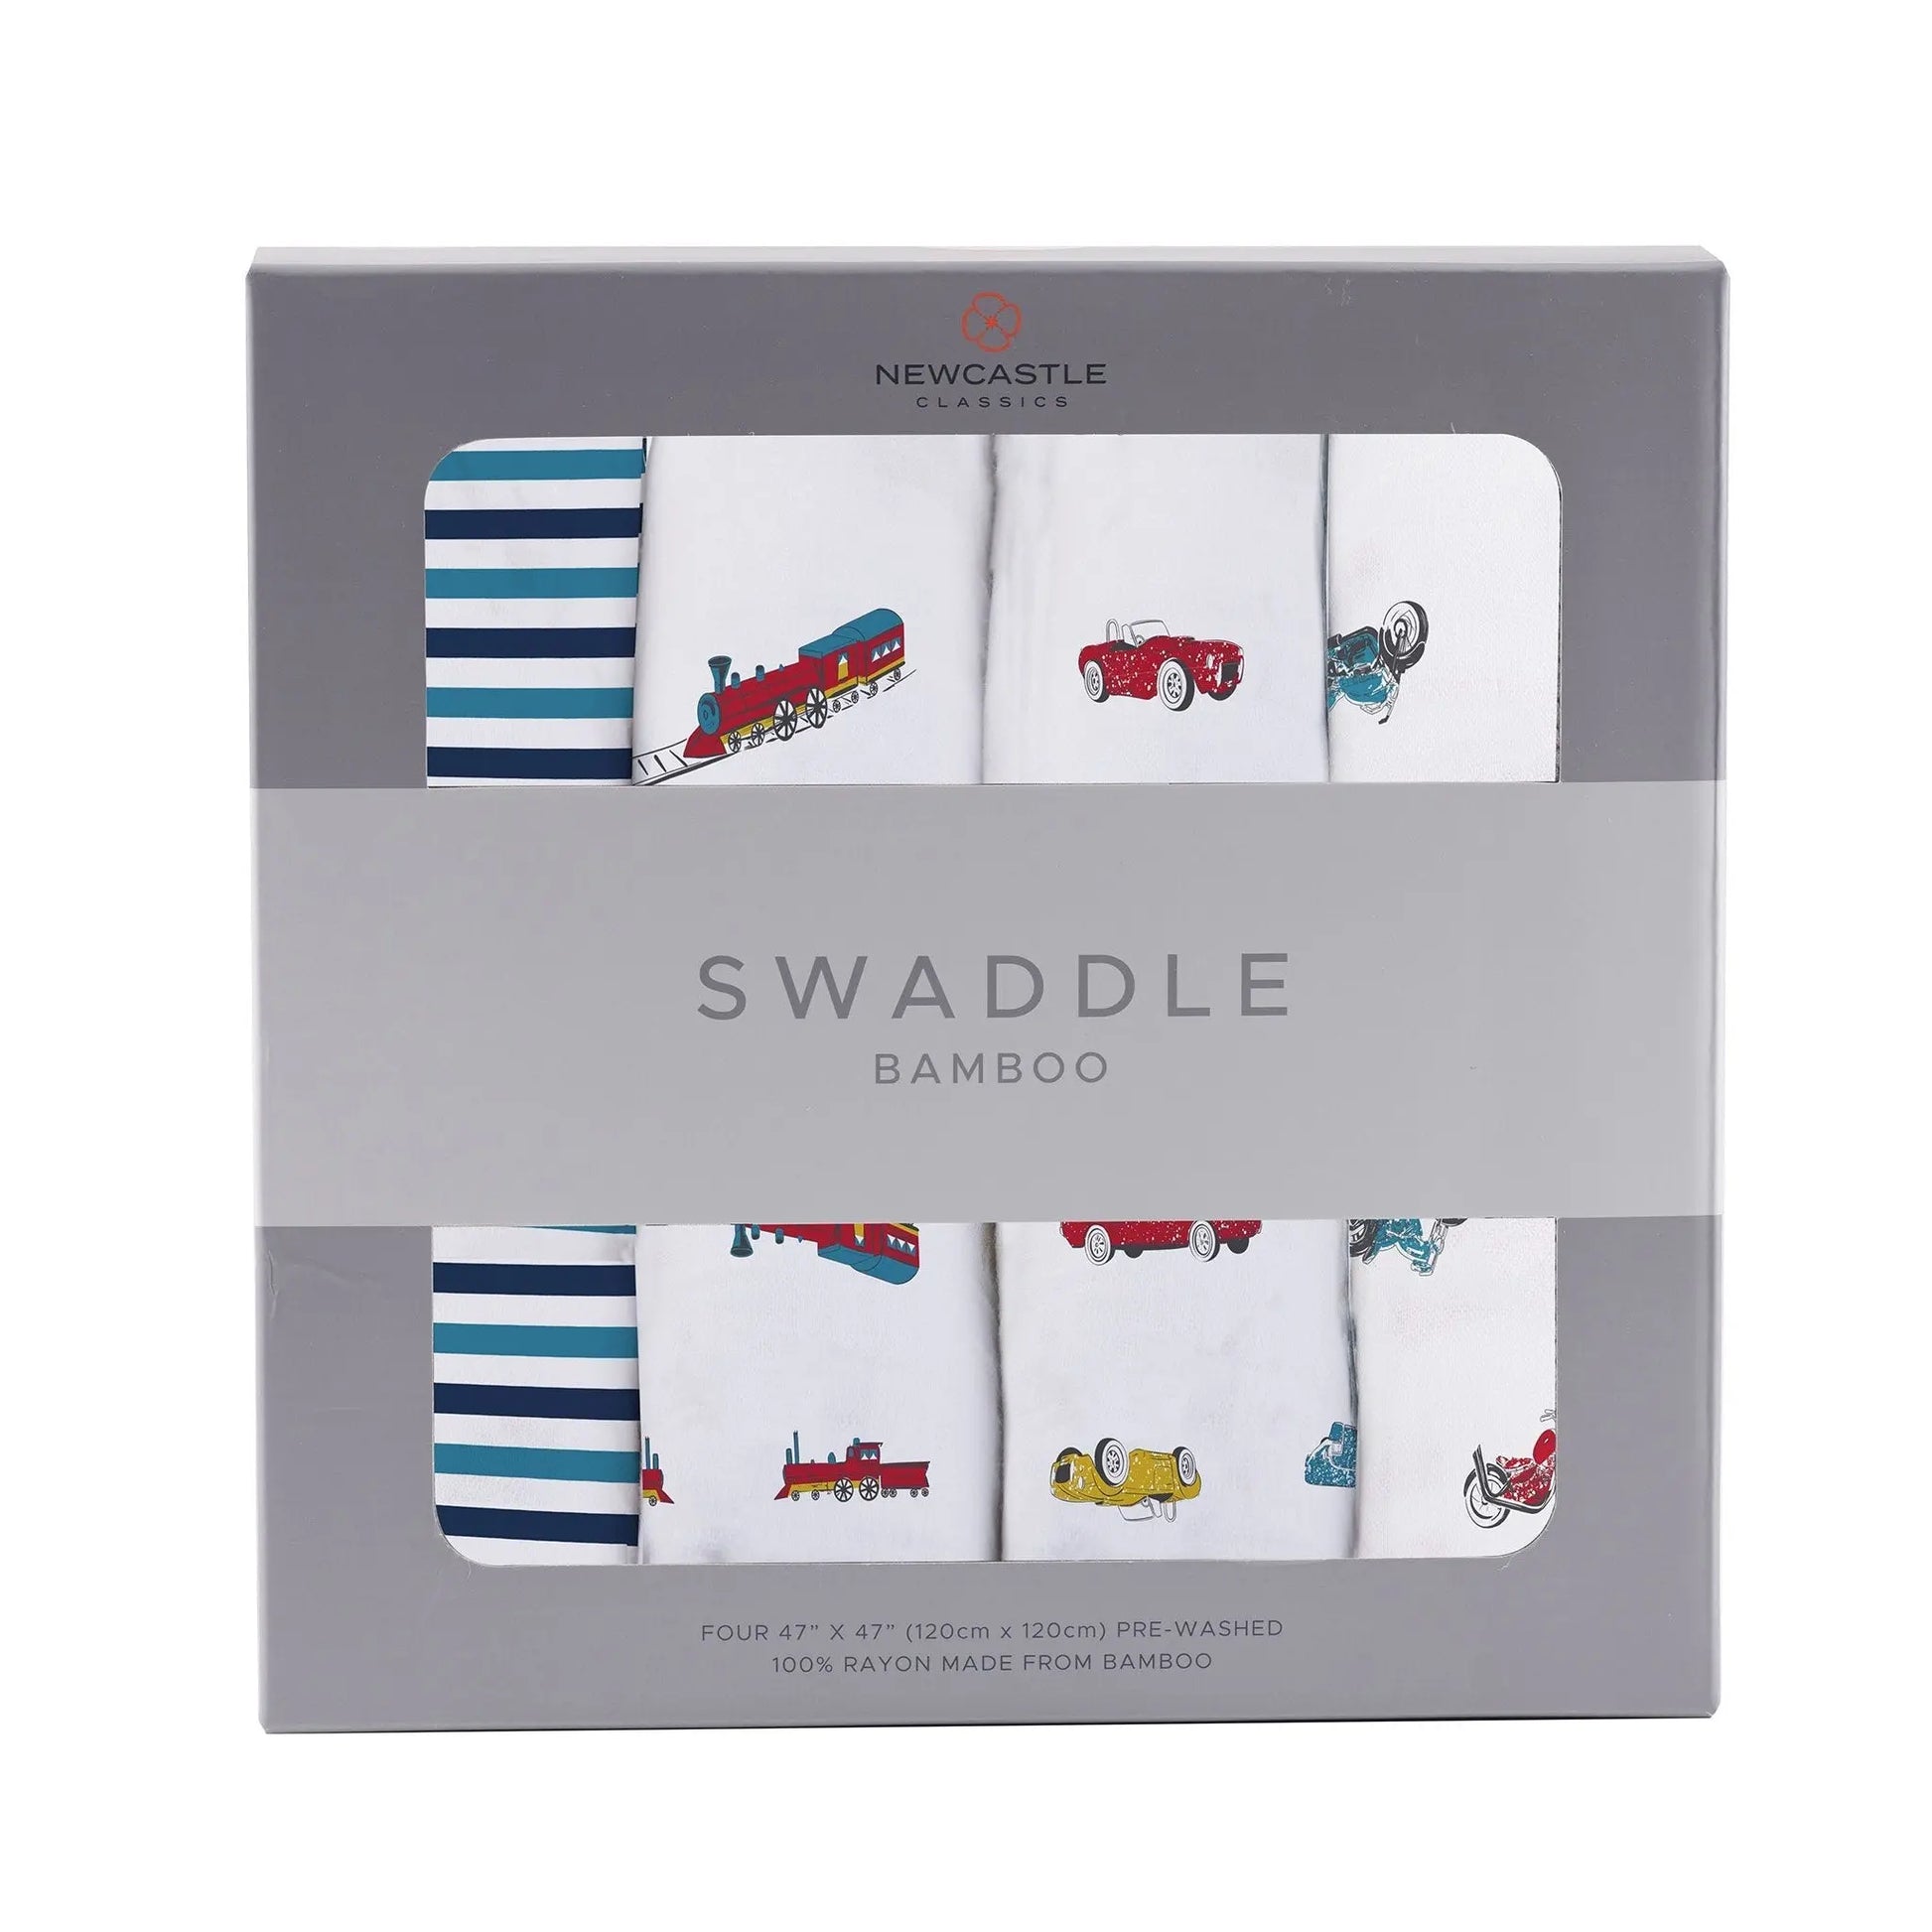 Ultimate Road Trip Swaddle 4 Pack Newcastle Classics